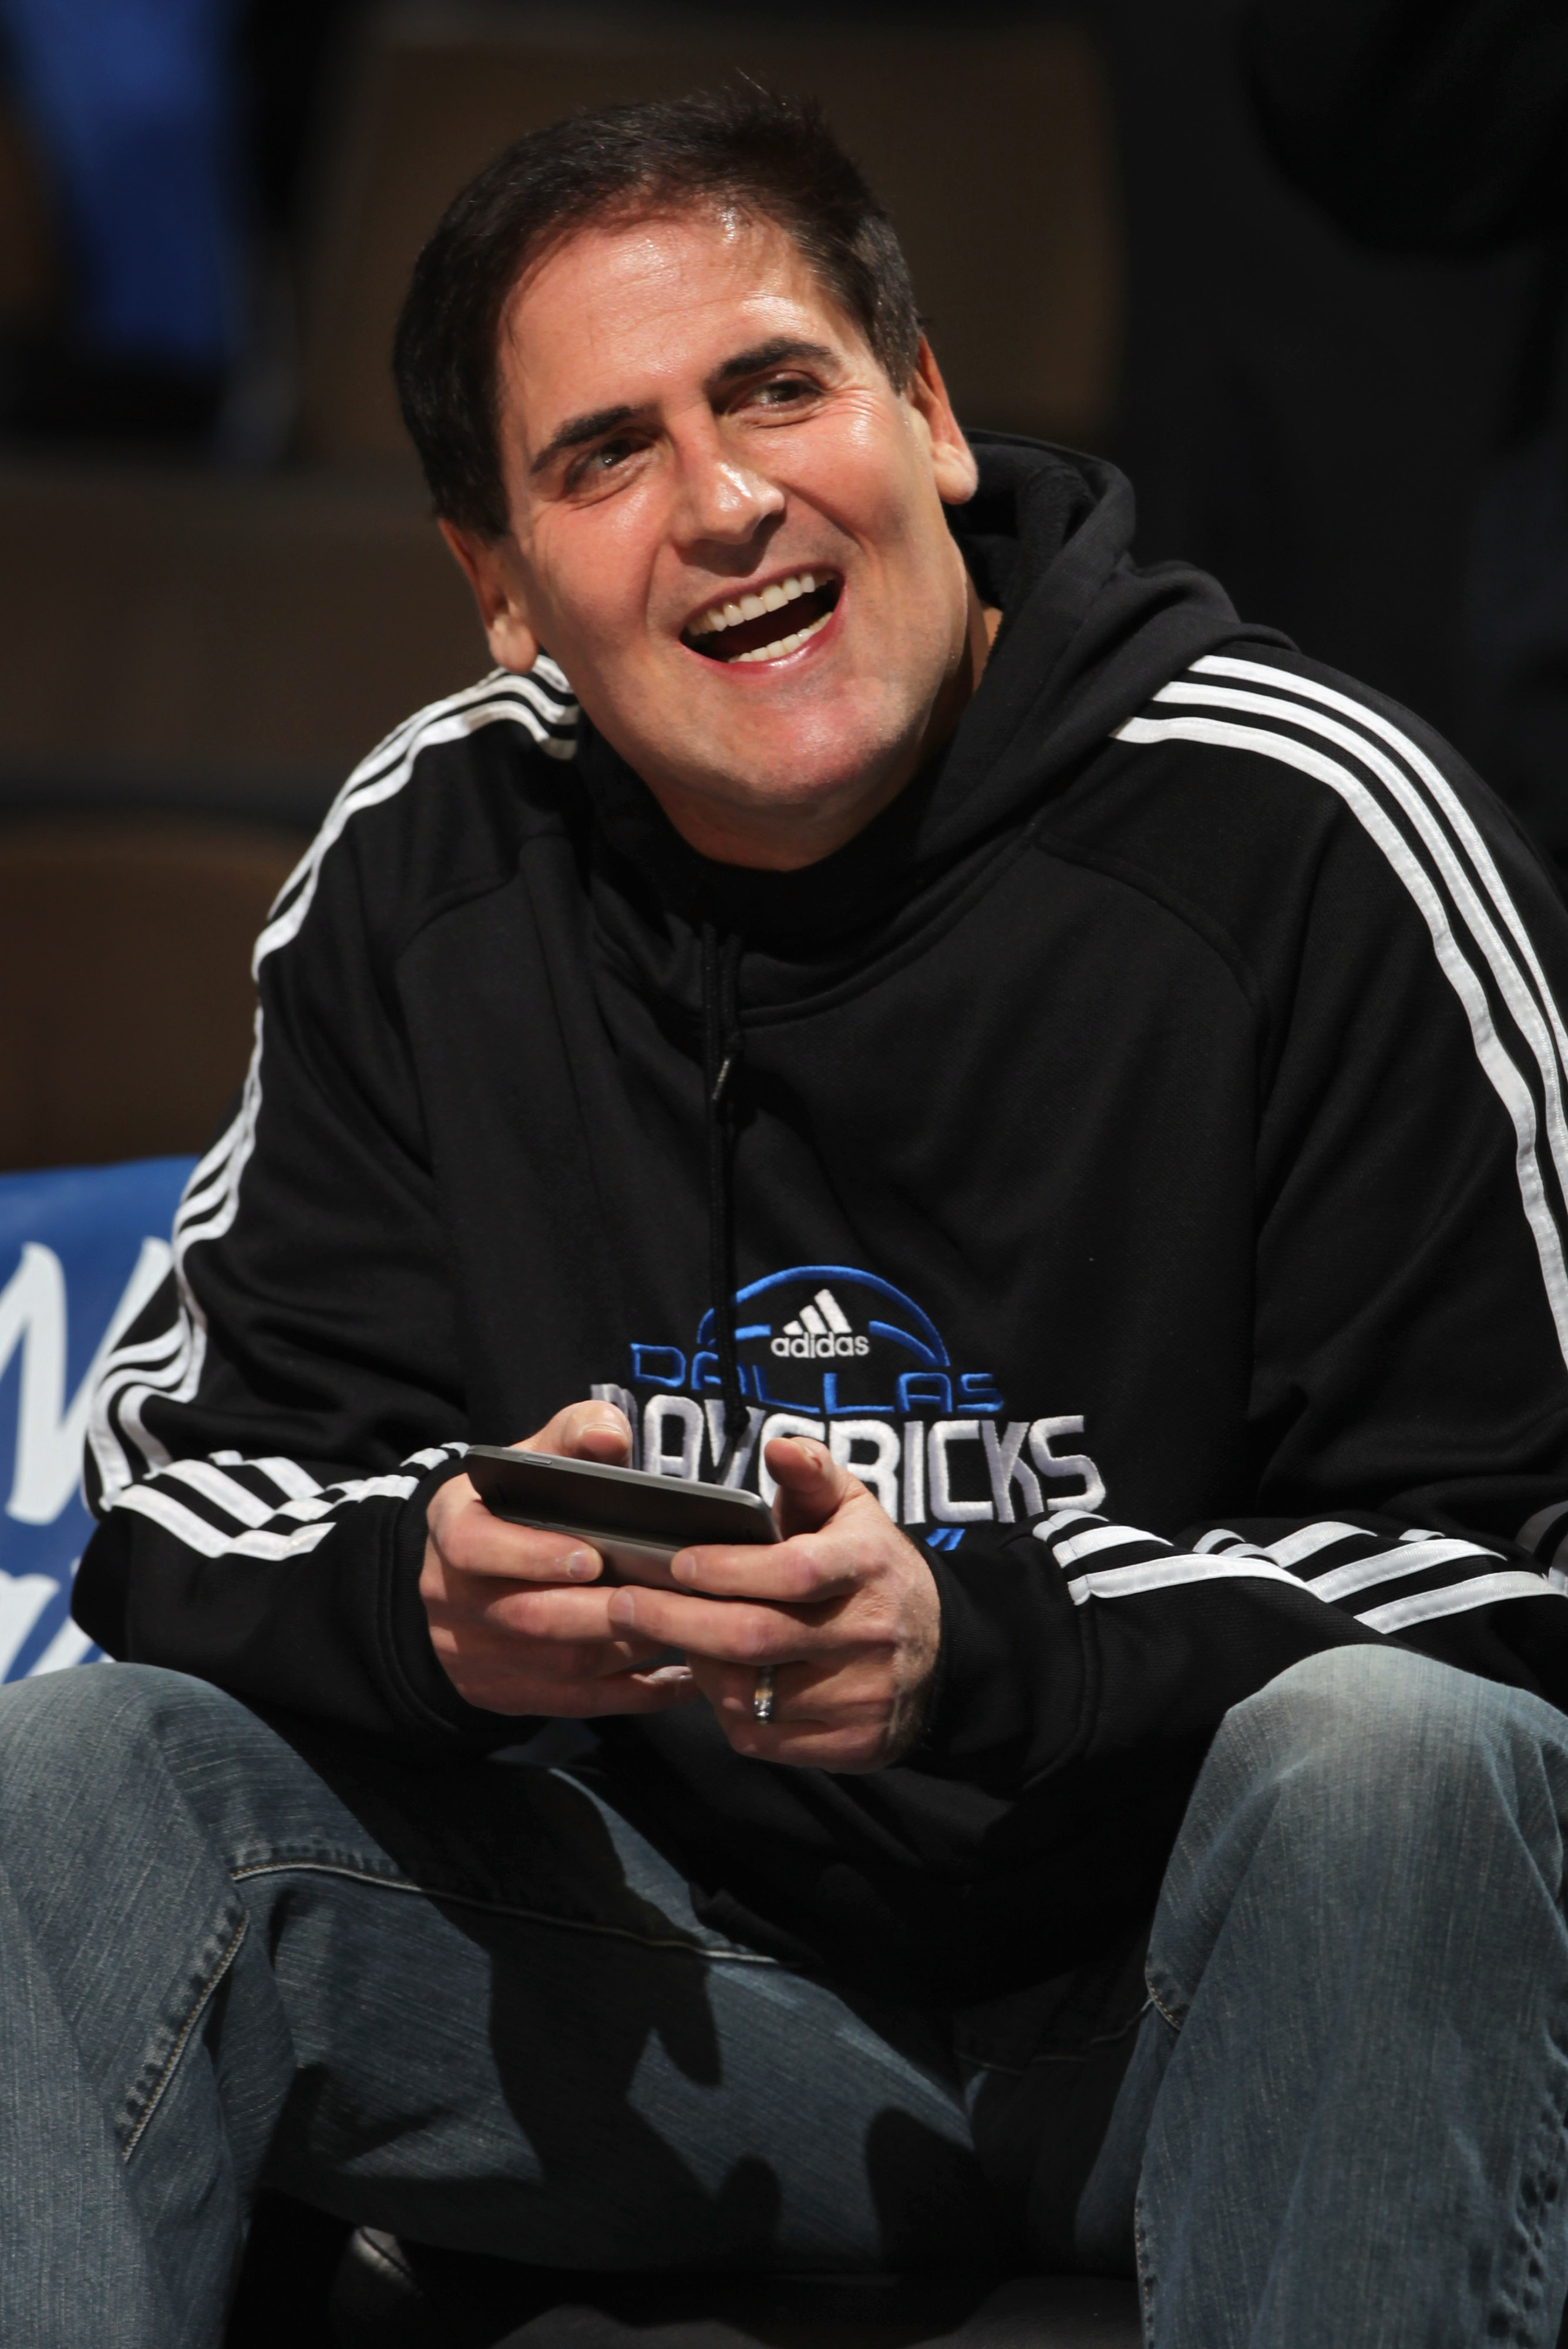 DENVER, CO - FEBRUARY 10:  Mark Cuban, owner of the Dallas Mavericks, uses a personal electonic device as he sits on the bench during warm ups against the Denver Nuggets during NBA action at the Pepsi Center on February 10, 2011 in Denver, Colorado. The N